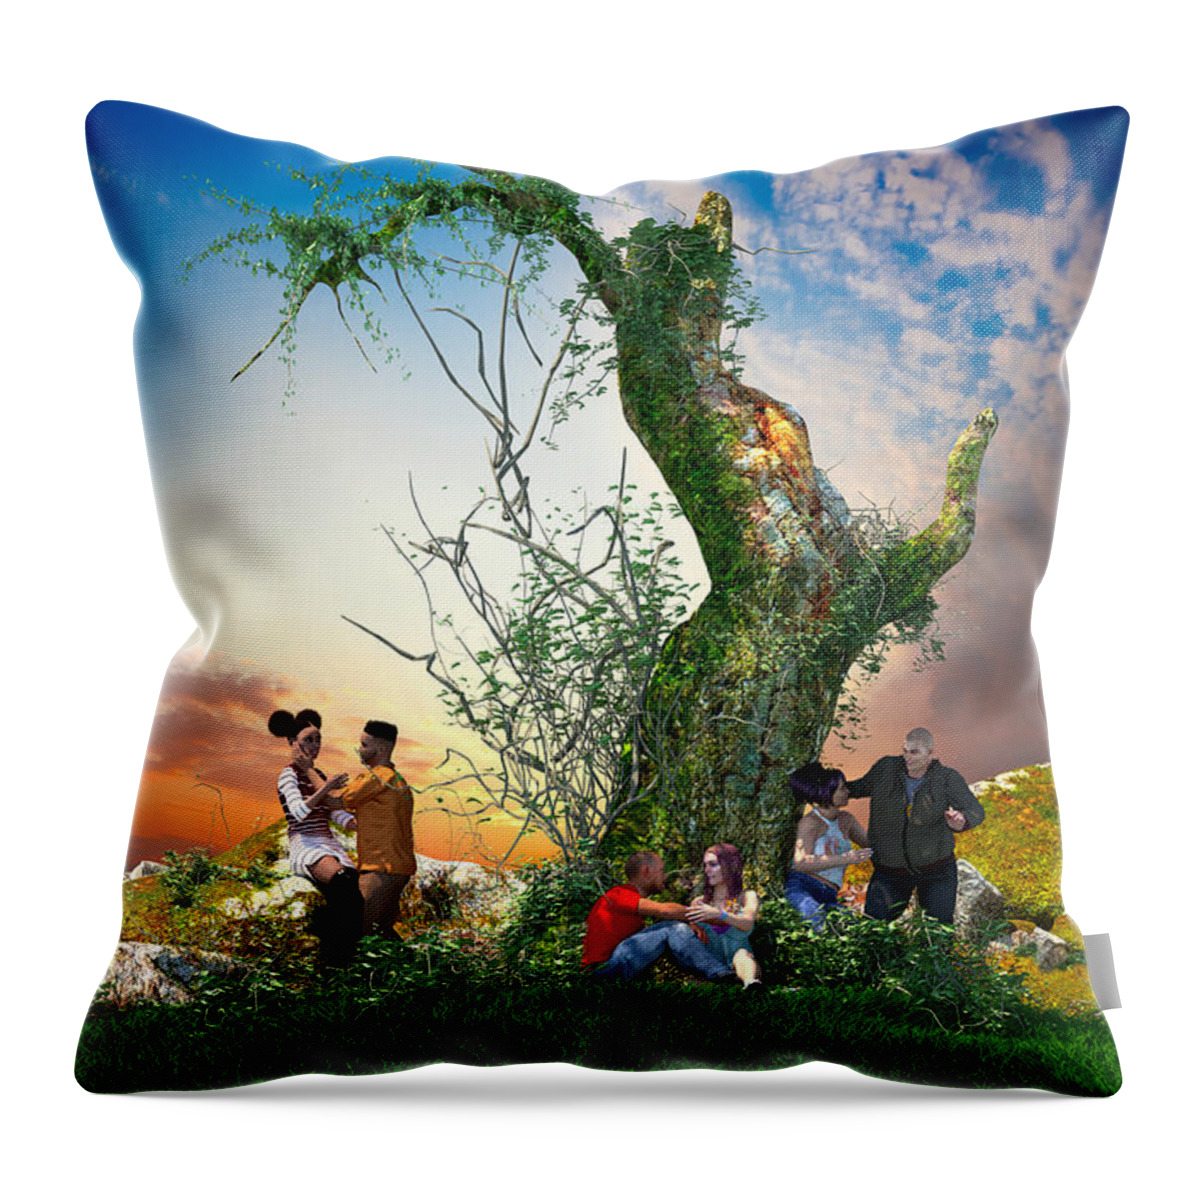 Eternally Rooted Throw Pillow featuring the digital art Inception by Williem McWhorter